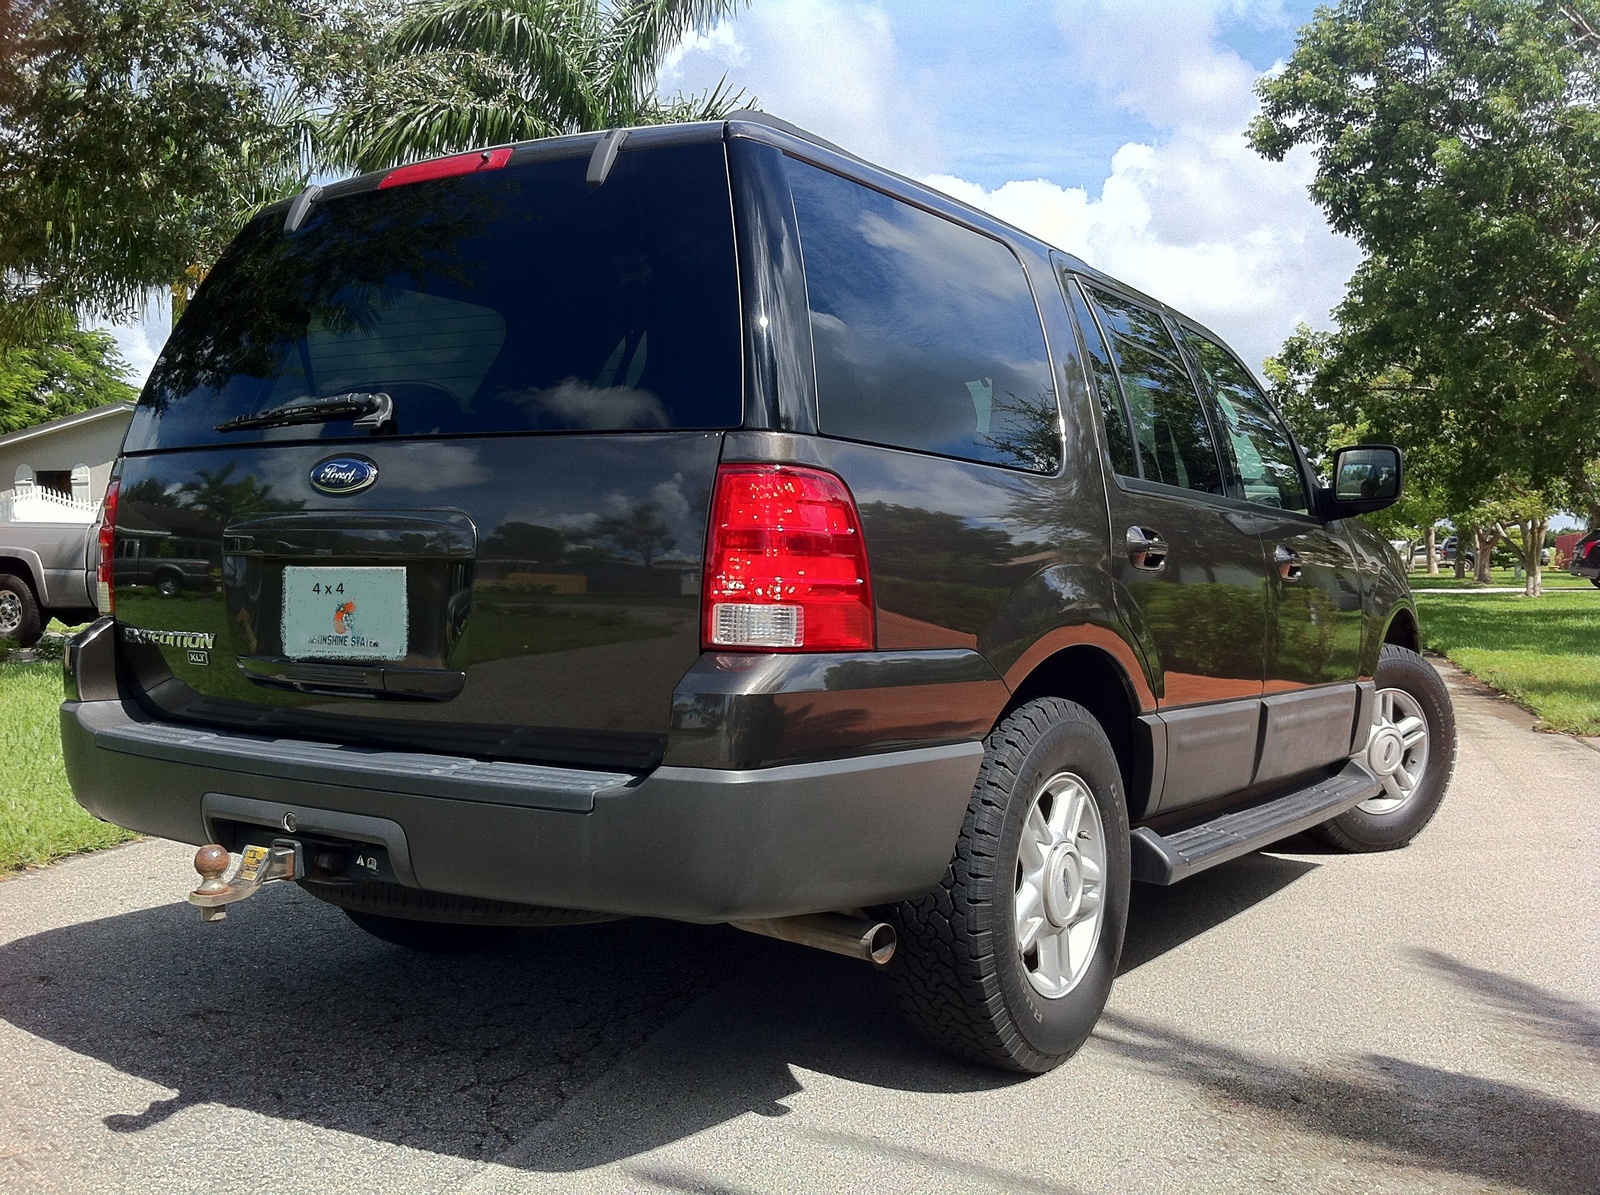 2006 Ford expedition xlt review #6